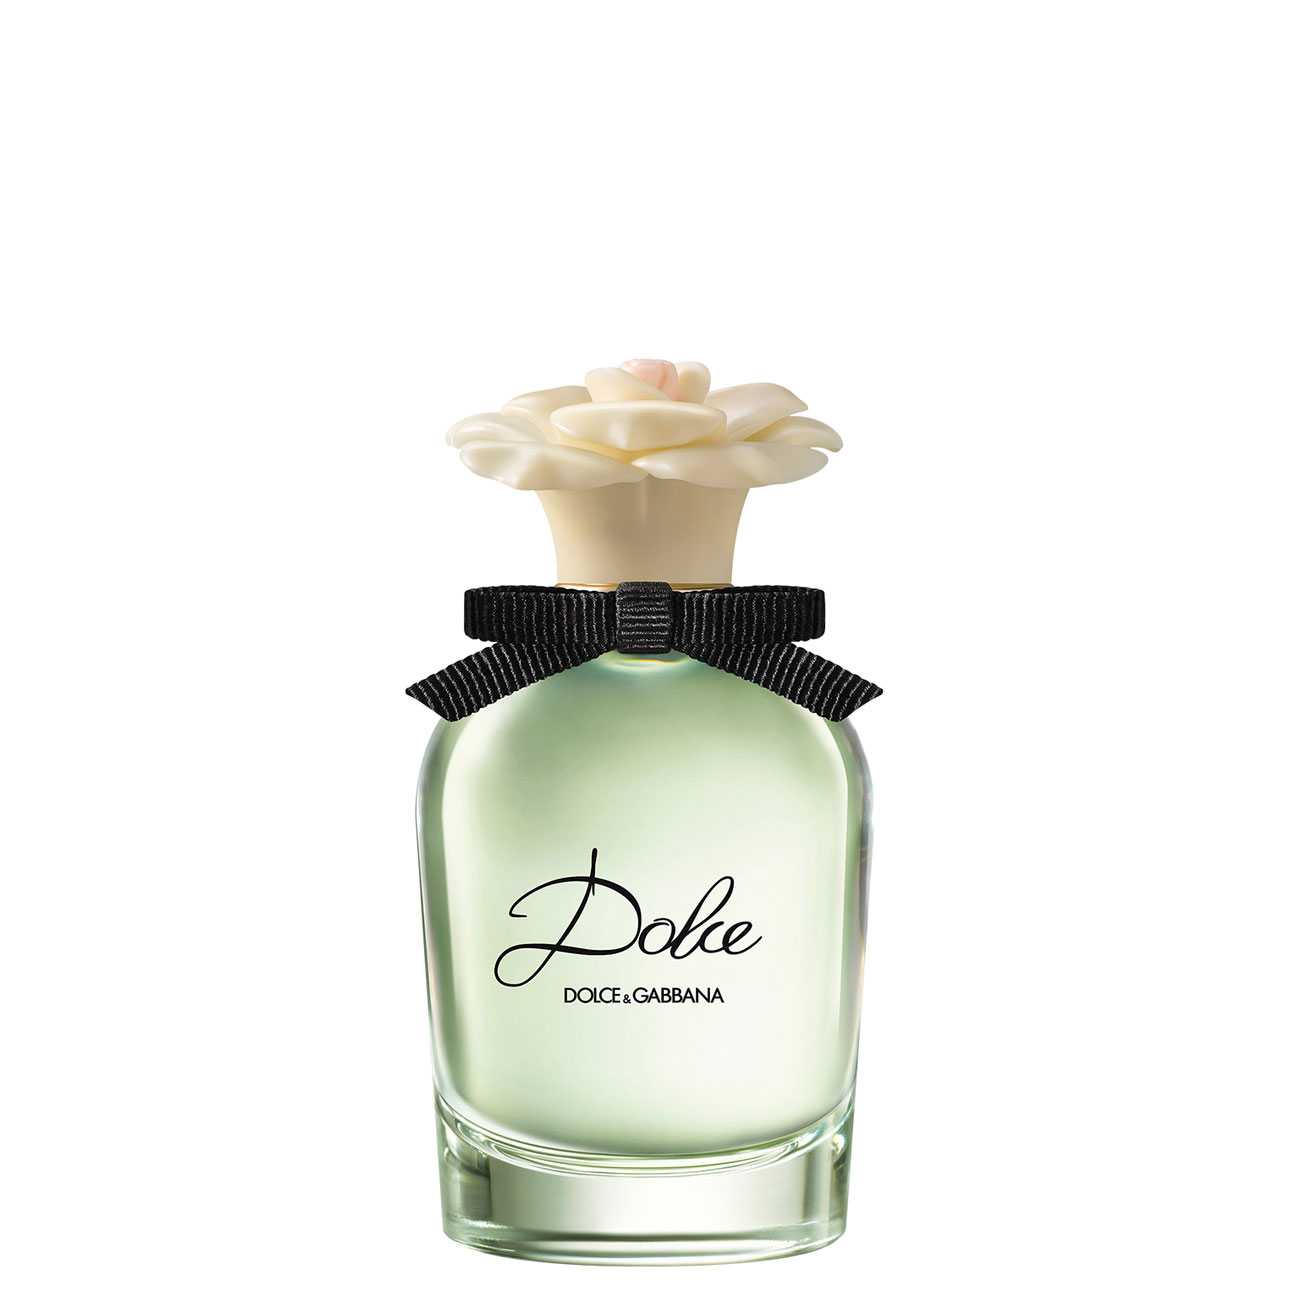 DOLCE 50ml